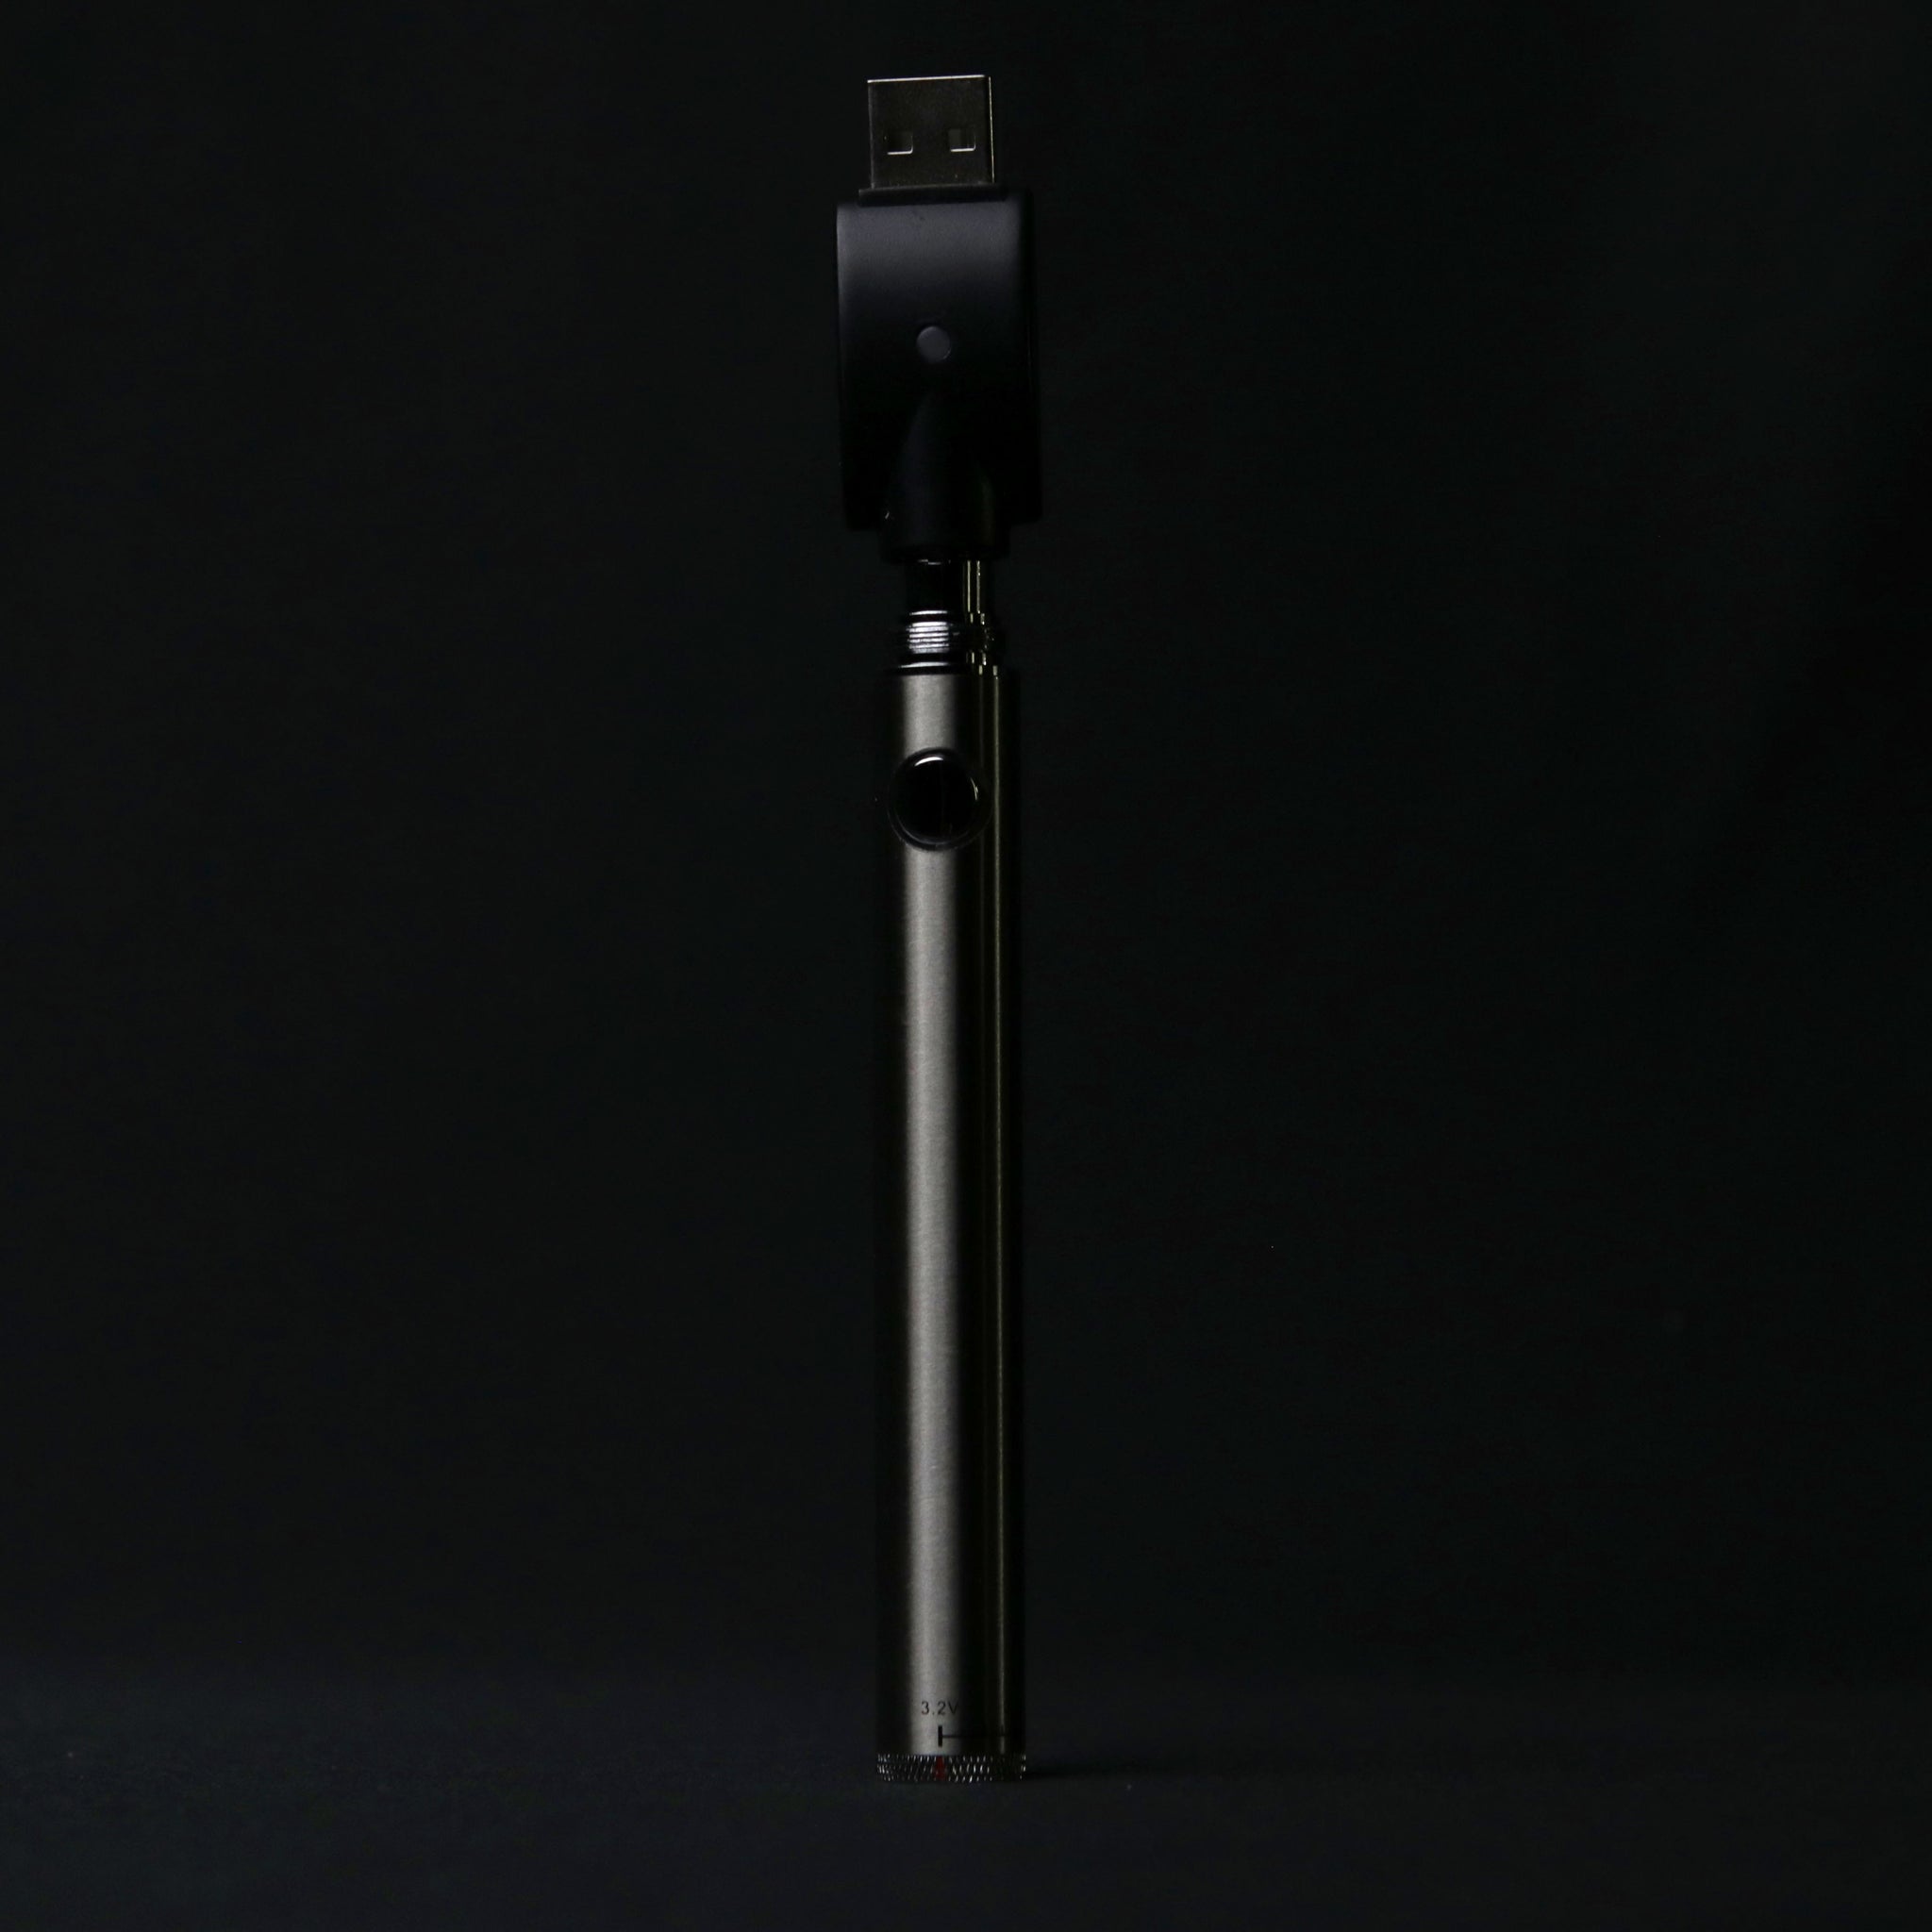 EVOD 900mAh Battery With USB Charger